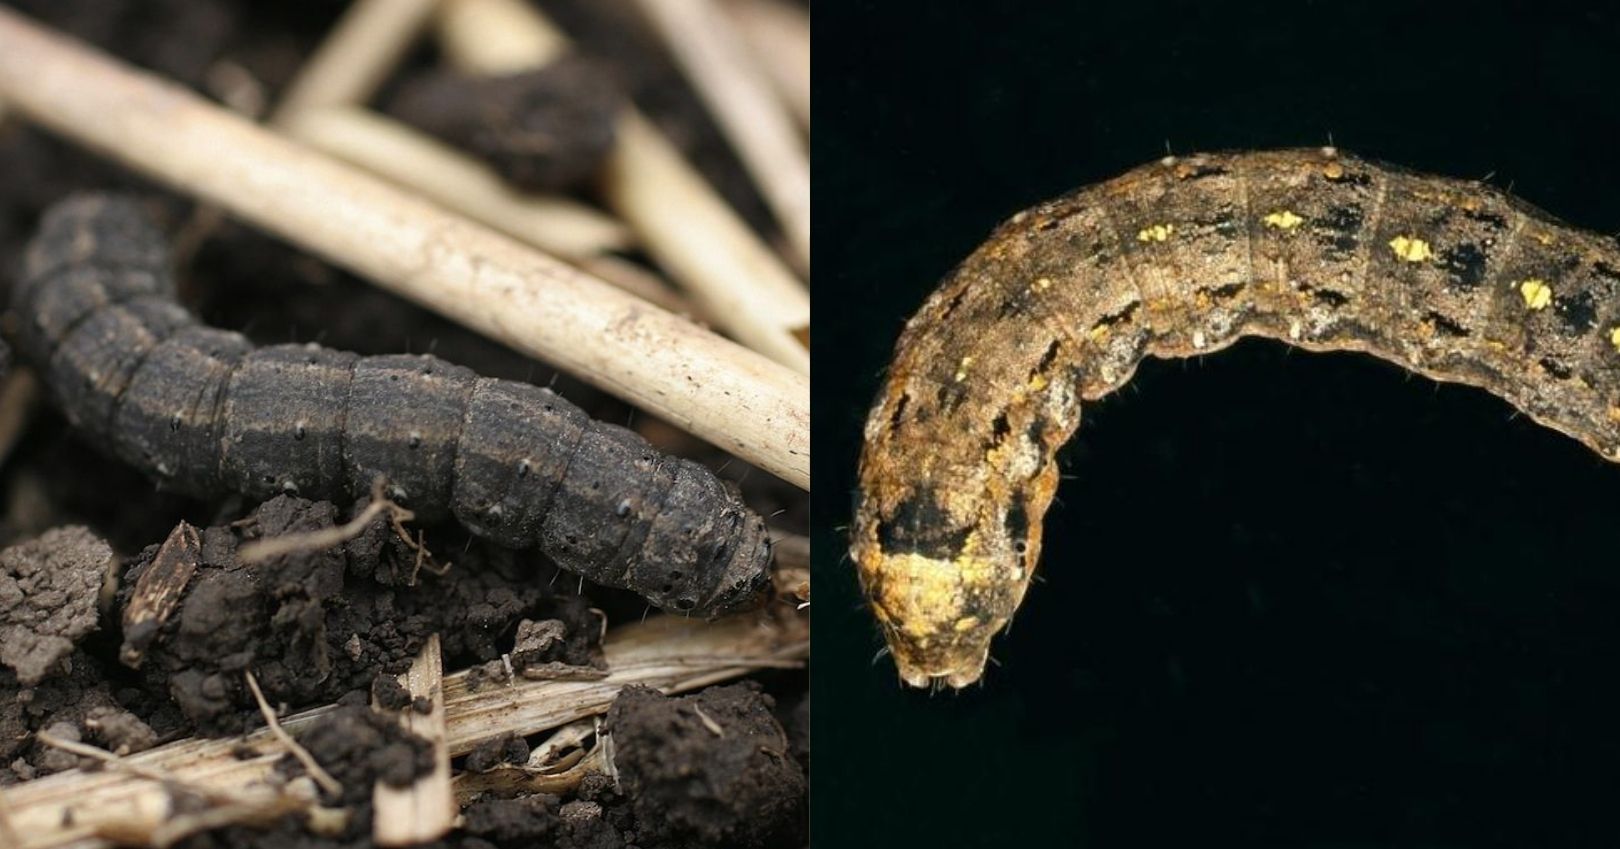 Black and Variegated Cutworms